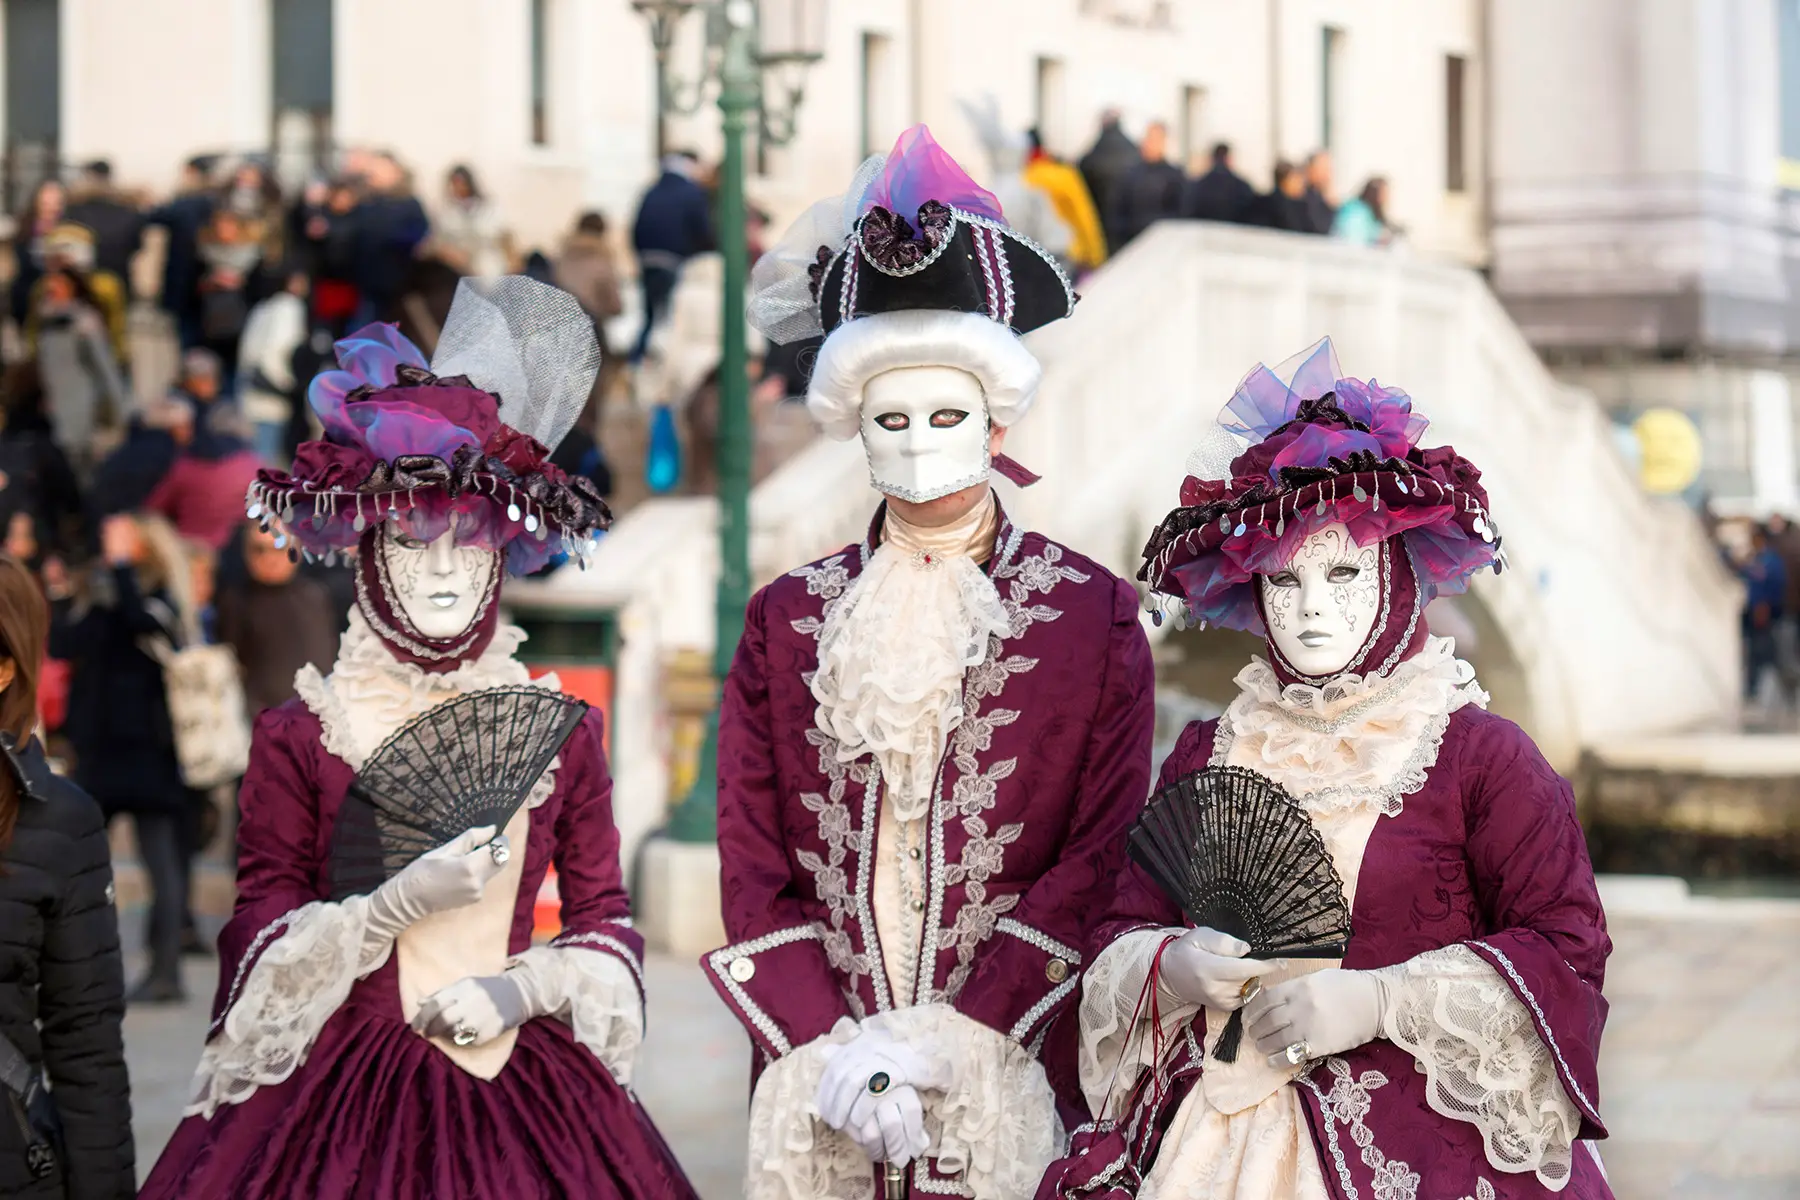 People wearing costumes of white masks and old-fashioned purple clothes